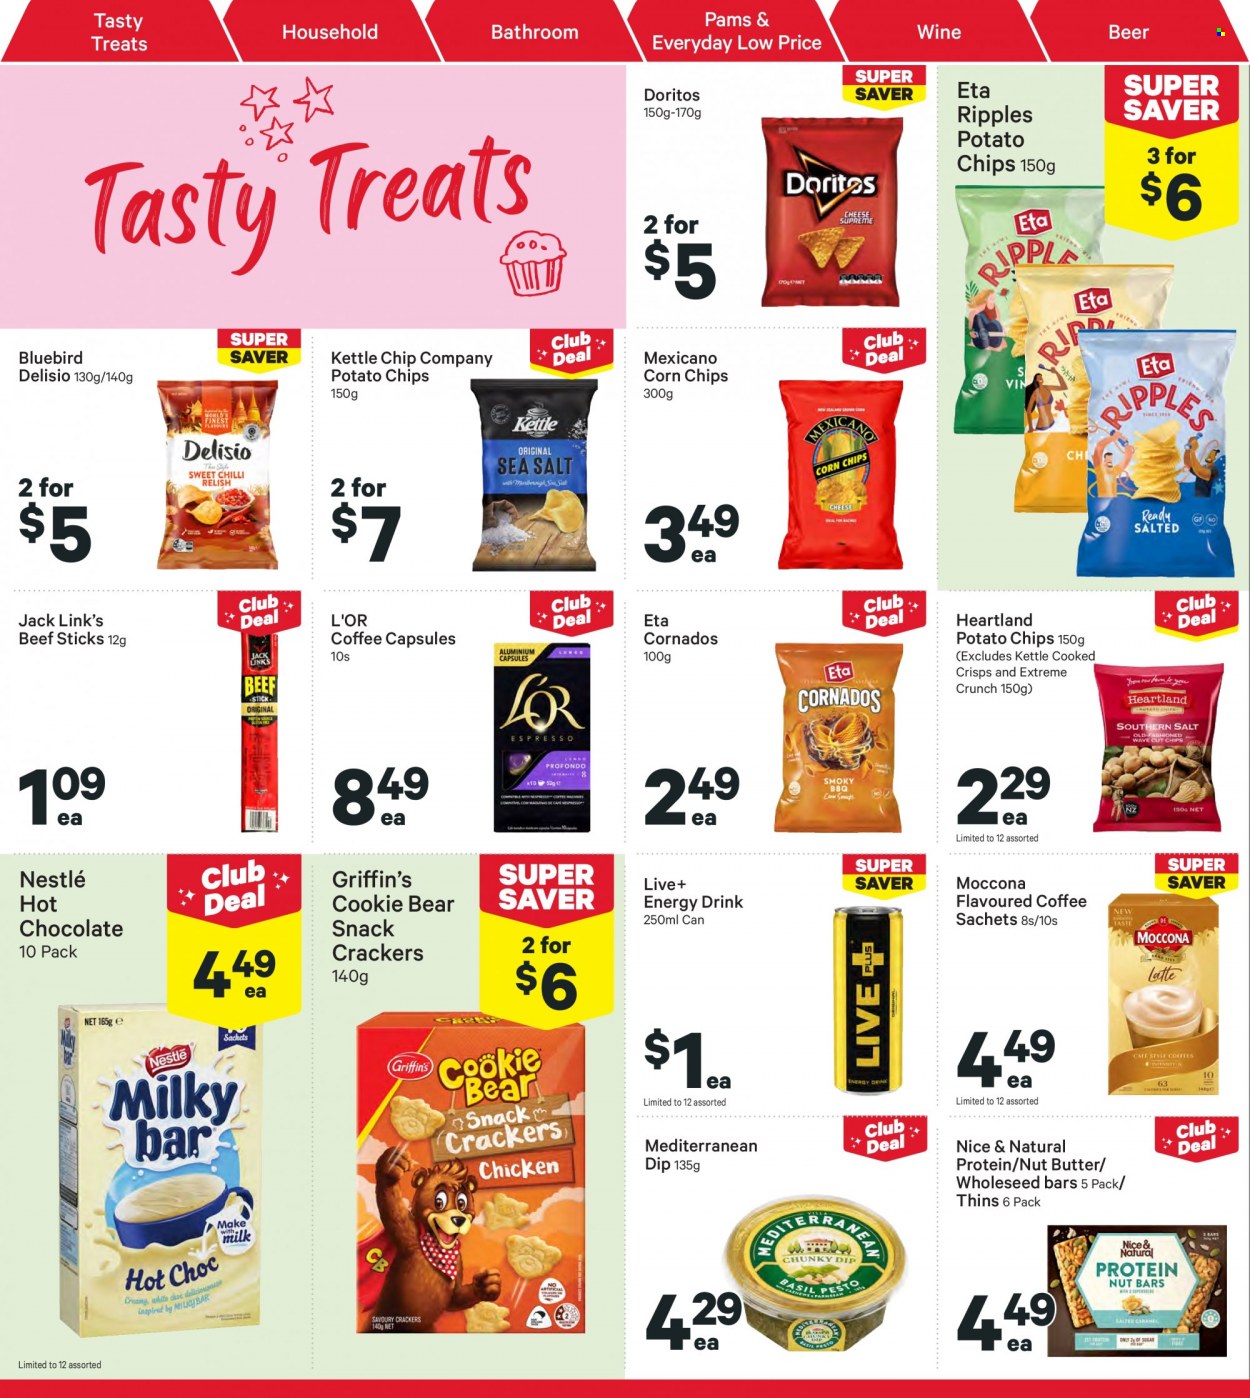 thumbnail - New World mailer - 27.03.2023 - 02.04.2023 - Sales products - beef sticks, dip, Nestlé, snack, crackers, Griffin's, Doritos, potato chips, chips, Thins, corn chips, Heartland, Mexicano, Bluebird, Delisio, Jack Link's, nut butter, energy drink, hot chocolate, coffee, Moccona, coffee capsules, L'Or, wine, beer. Page 26.